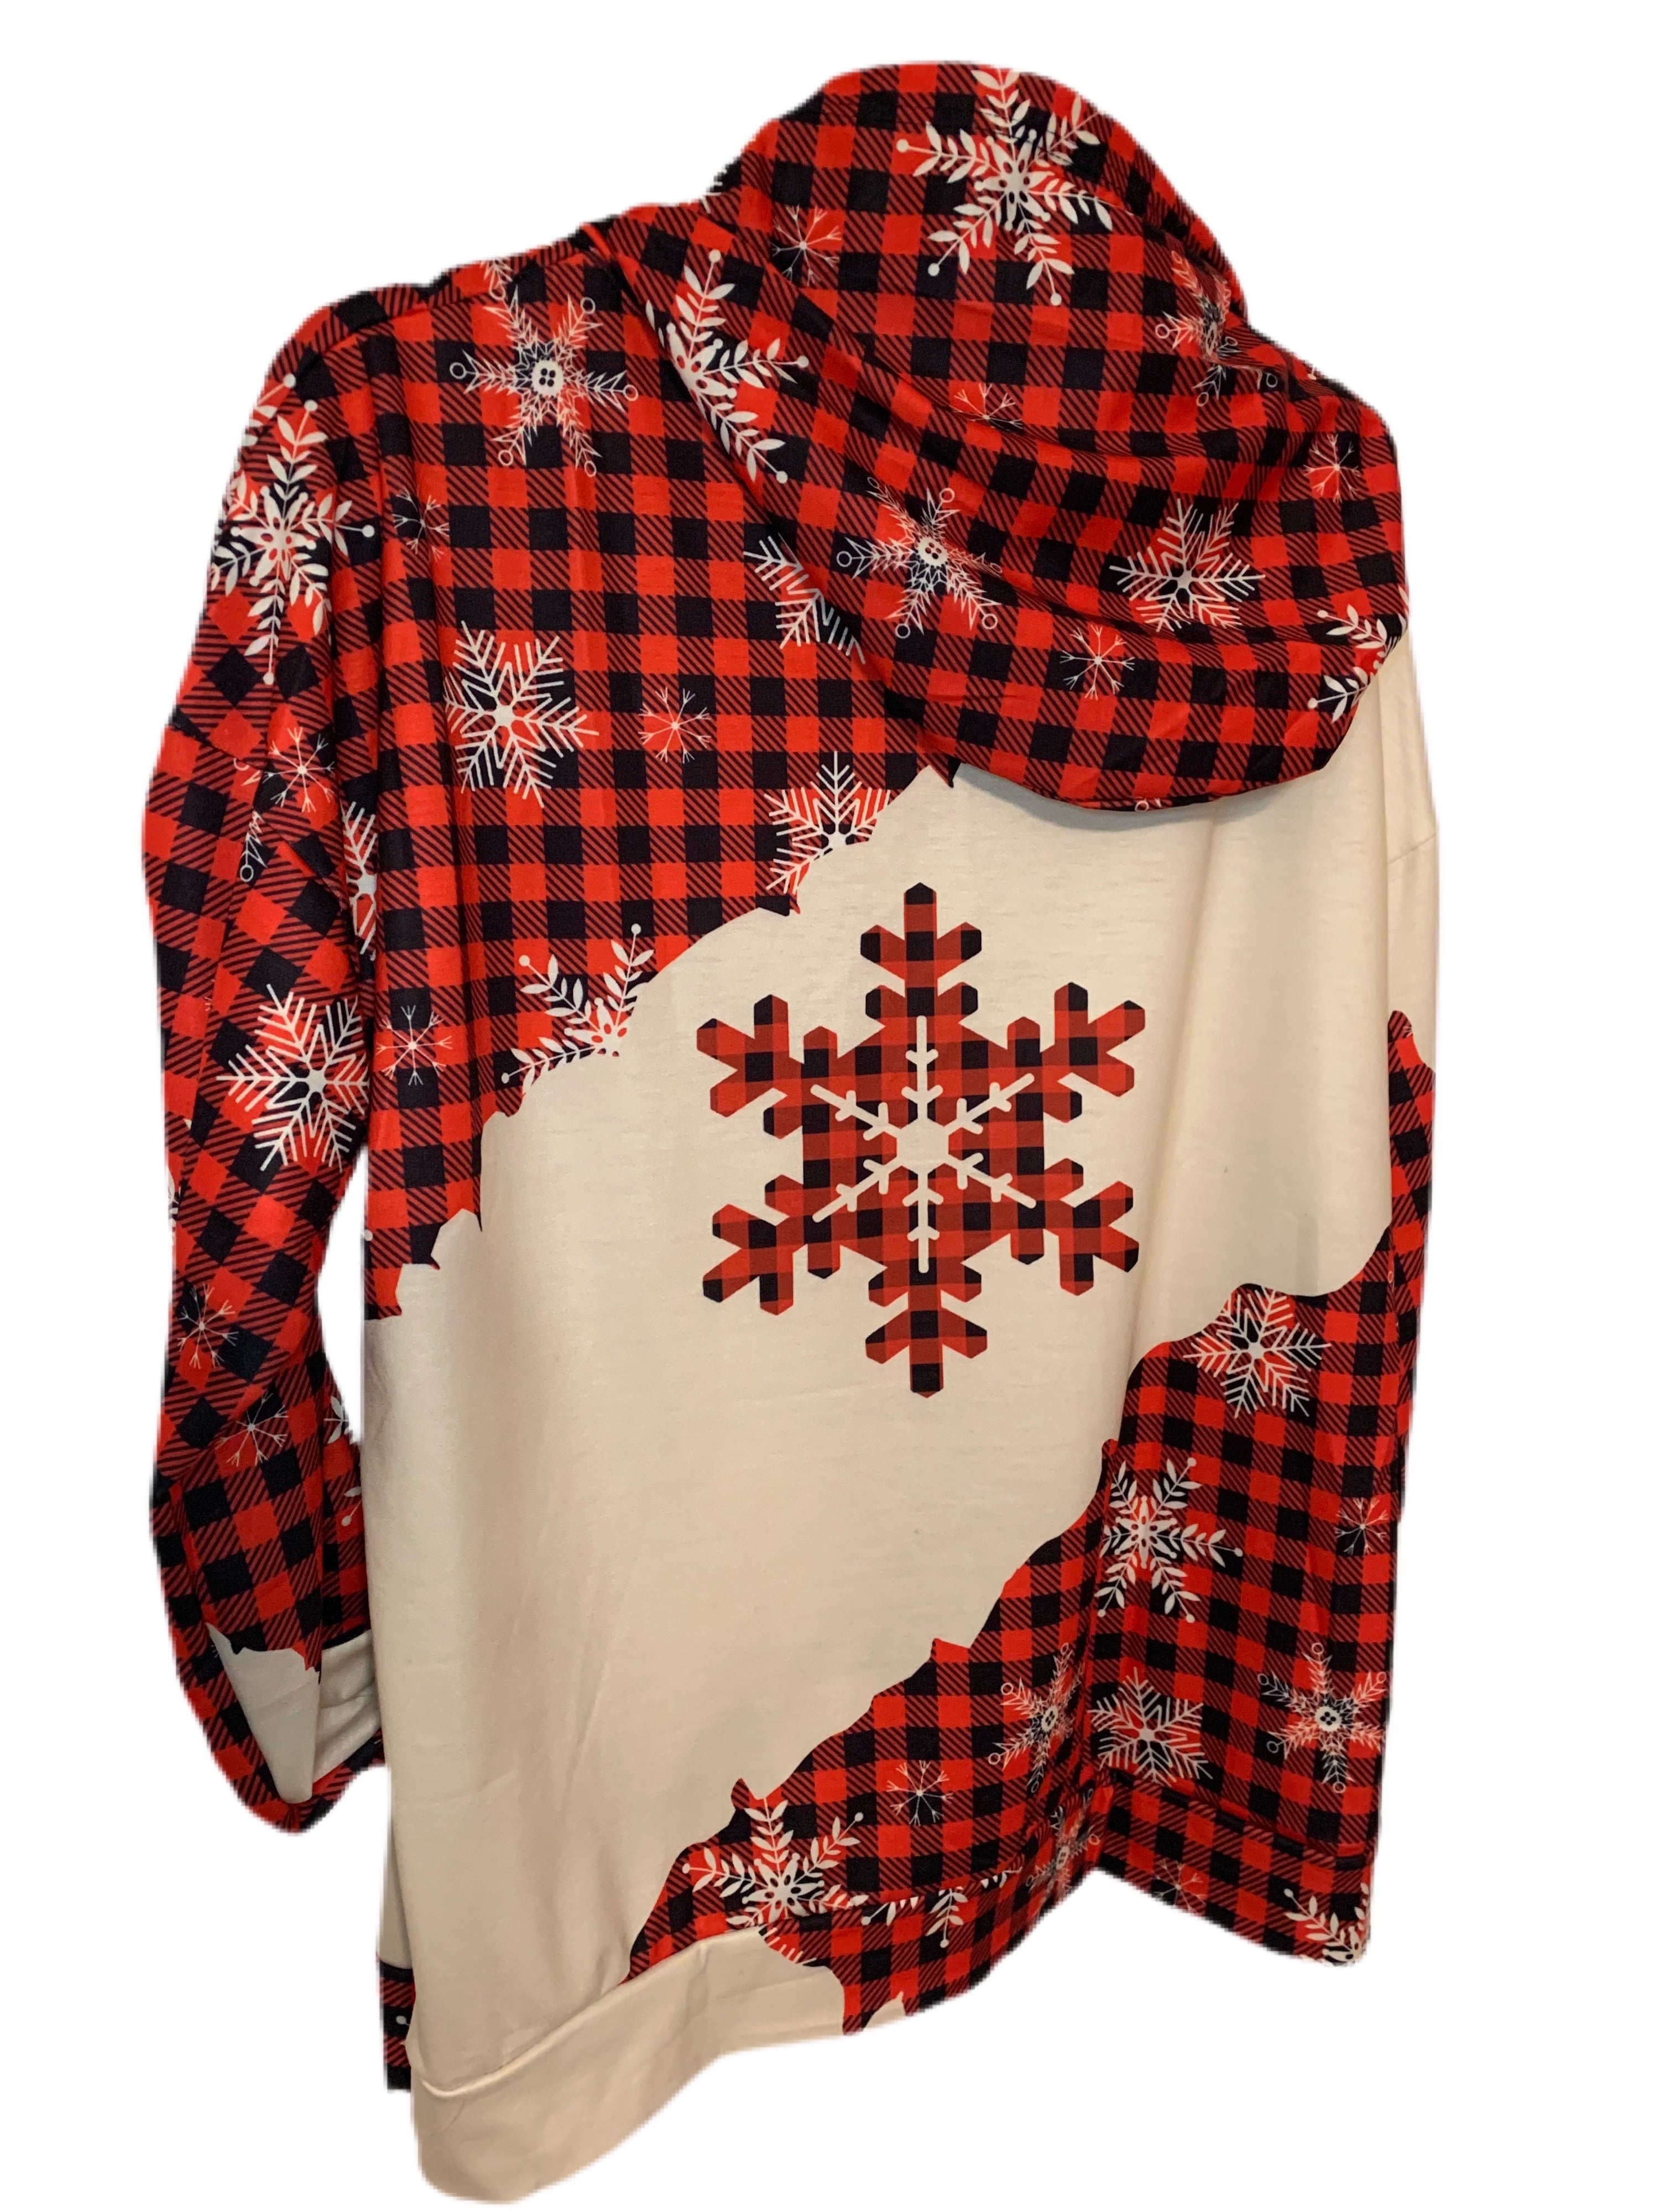  •Red plaid long sleeve with snowflake print and hooded back  •Pouch pocket on the front  •Lightweight knit hoodie  Runs true to size guide ! 